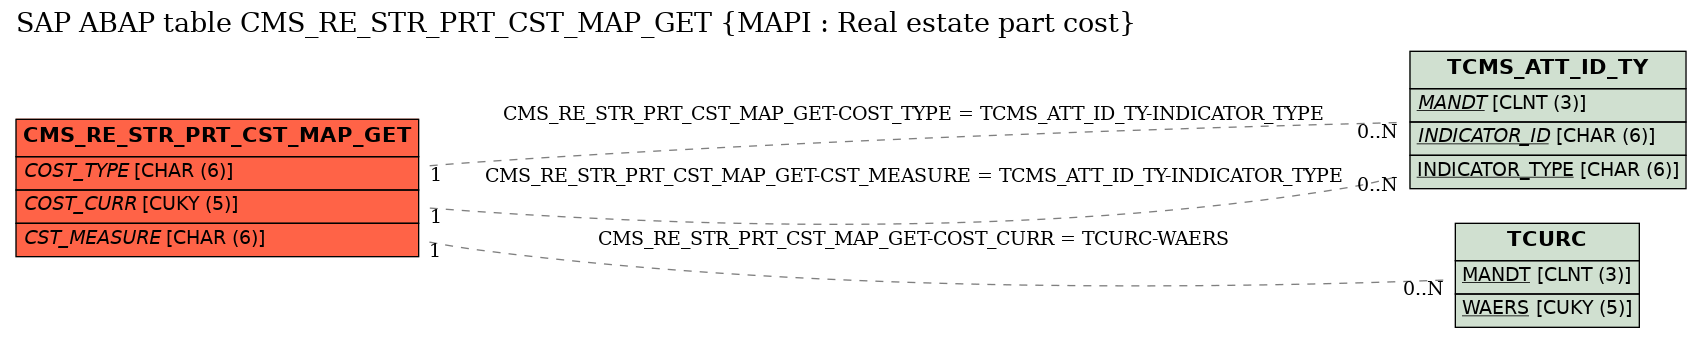 E-R Diagram for table CMS_RE_STR_PRT_CST_MAP_GET (MAPI : Real estate part cost)